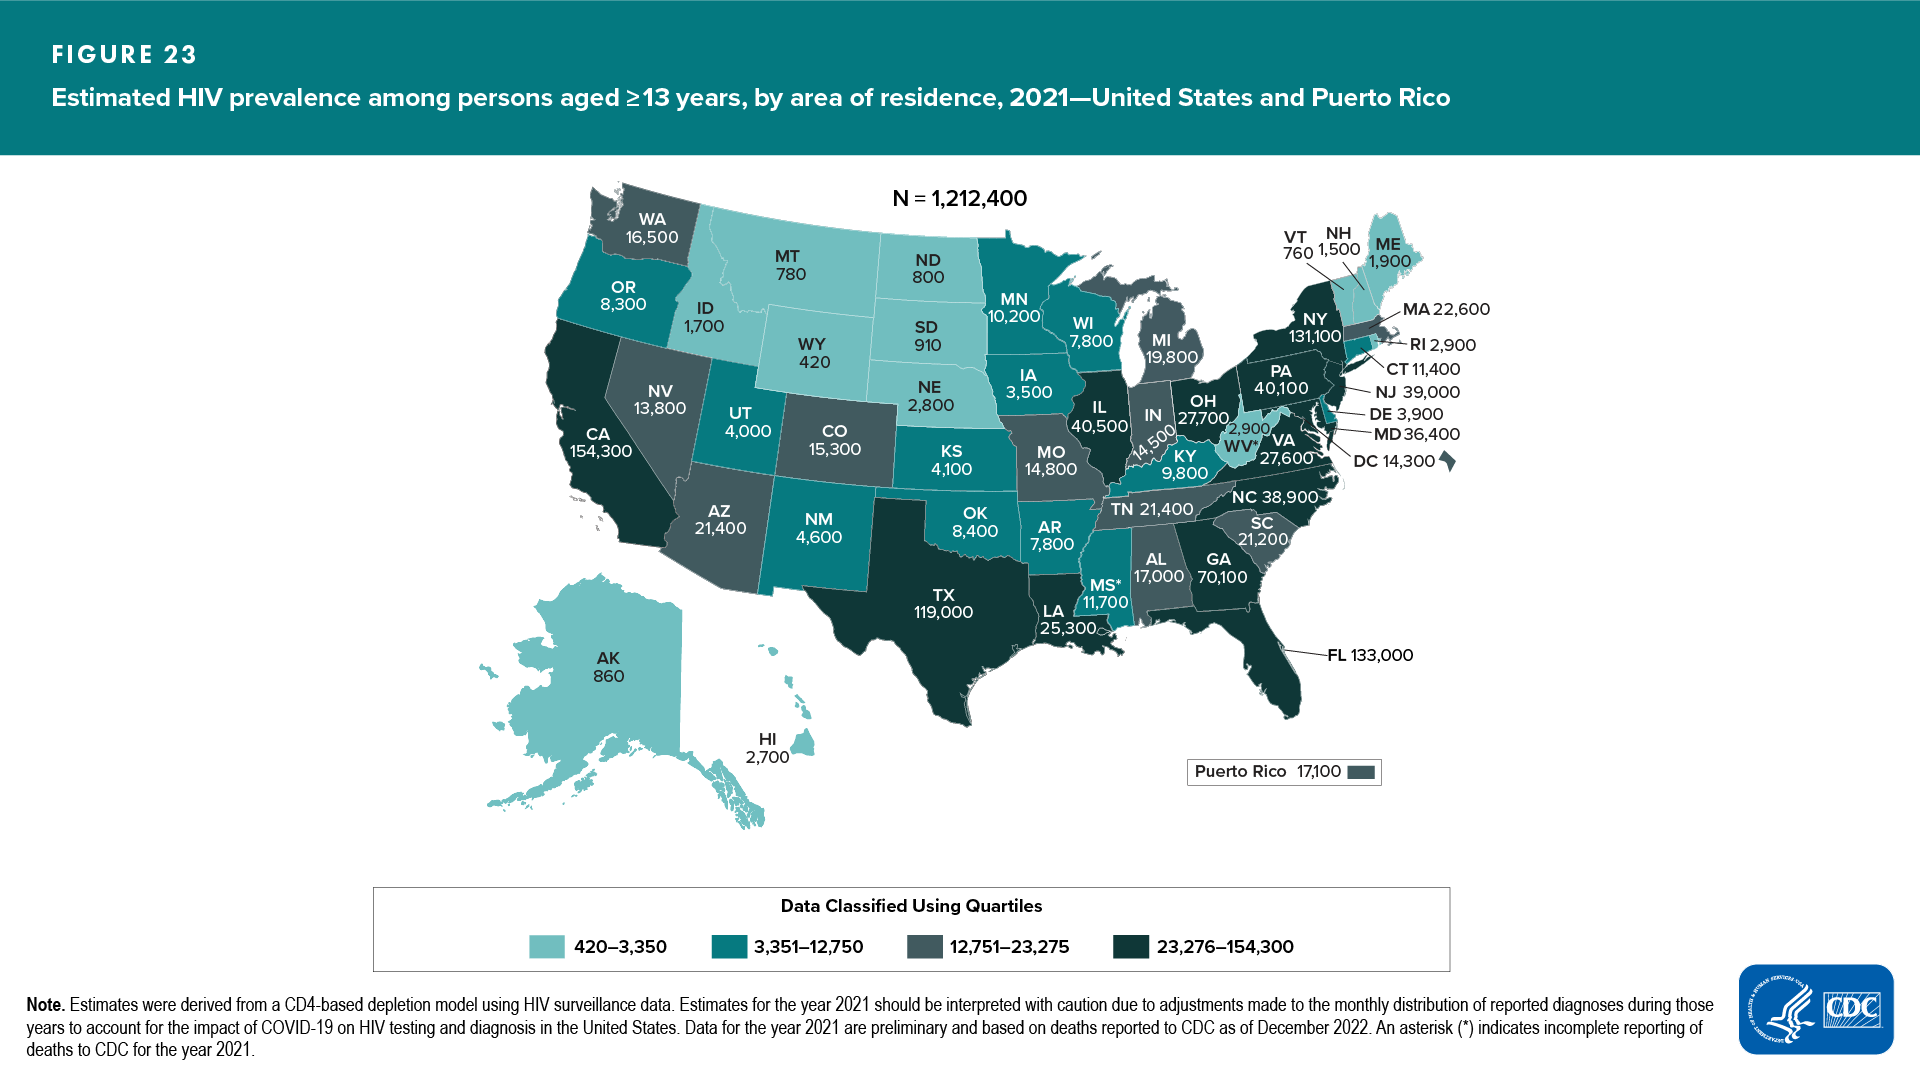 Figure 23. Estimated HIV prevalence among persons aged ≥13 years, by area of residence, 2021—United States and Puerto Rico